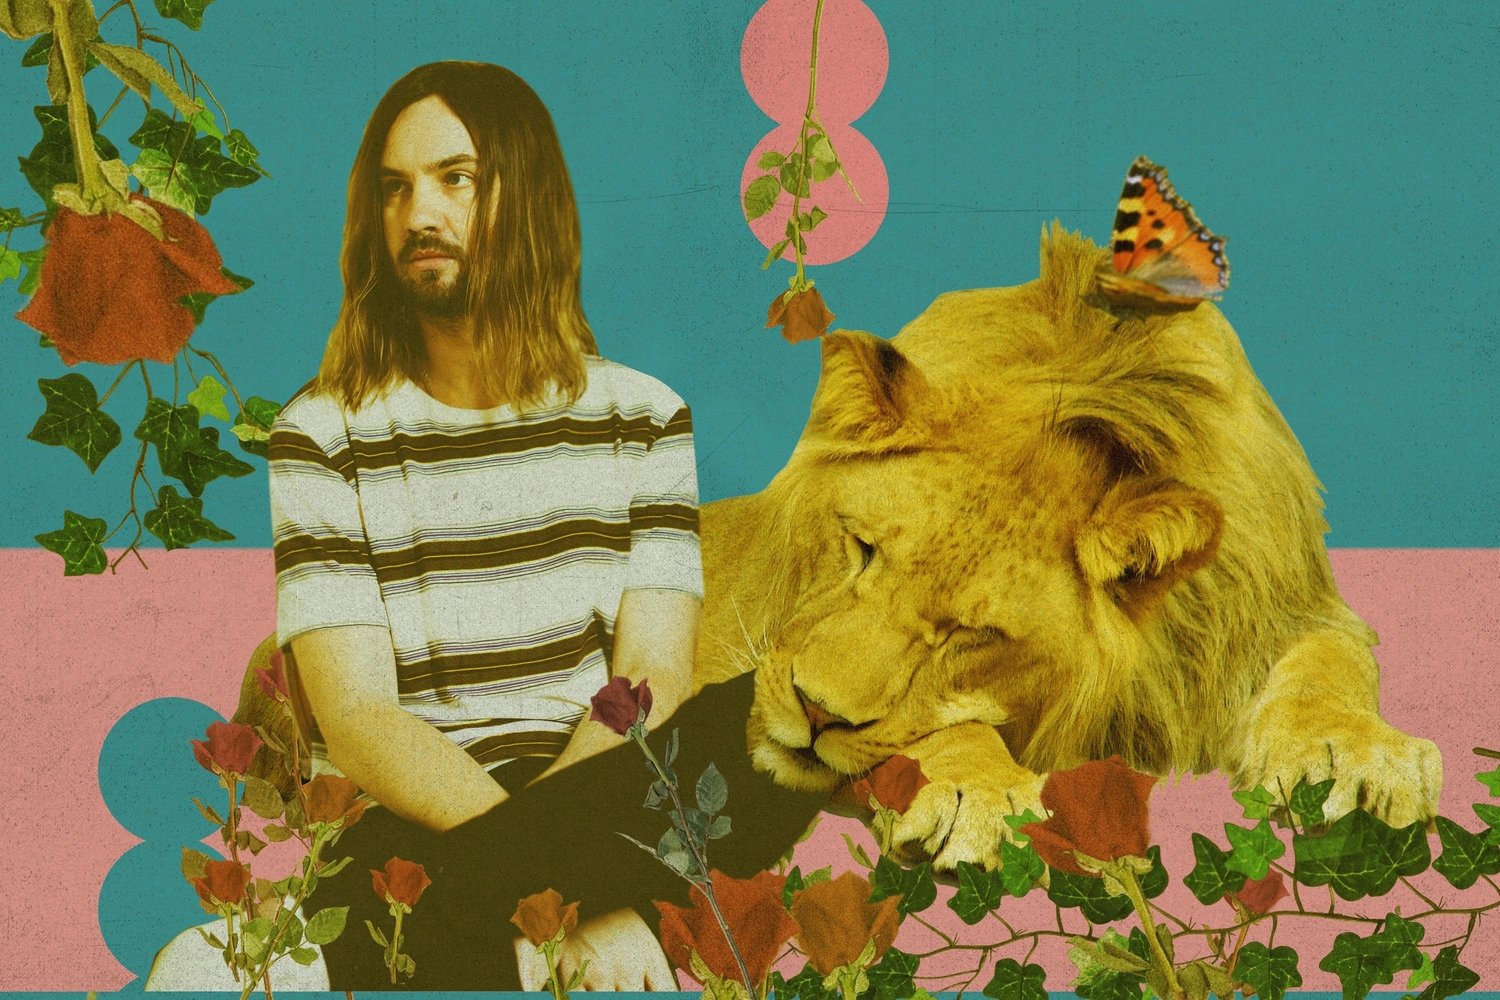 Tame Impala graces the cover of DIY's February 2020 issue!